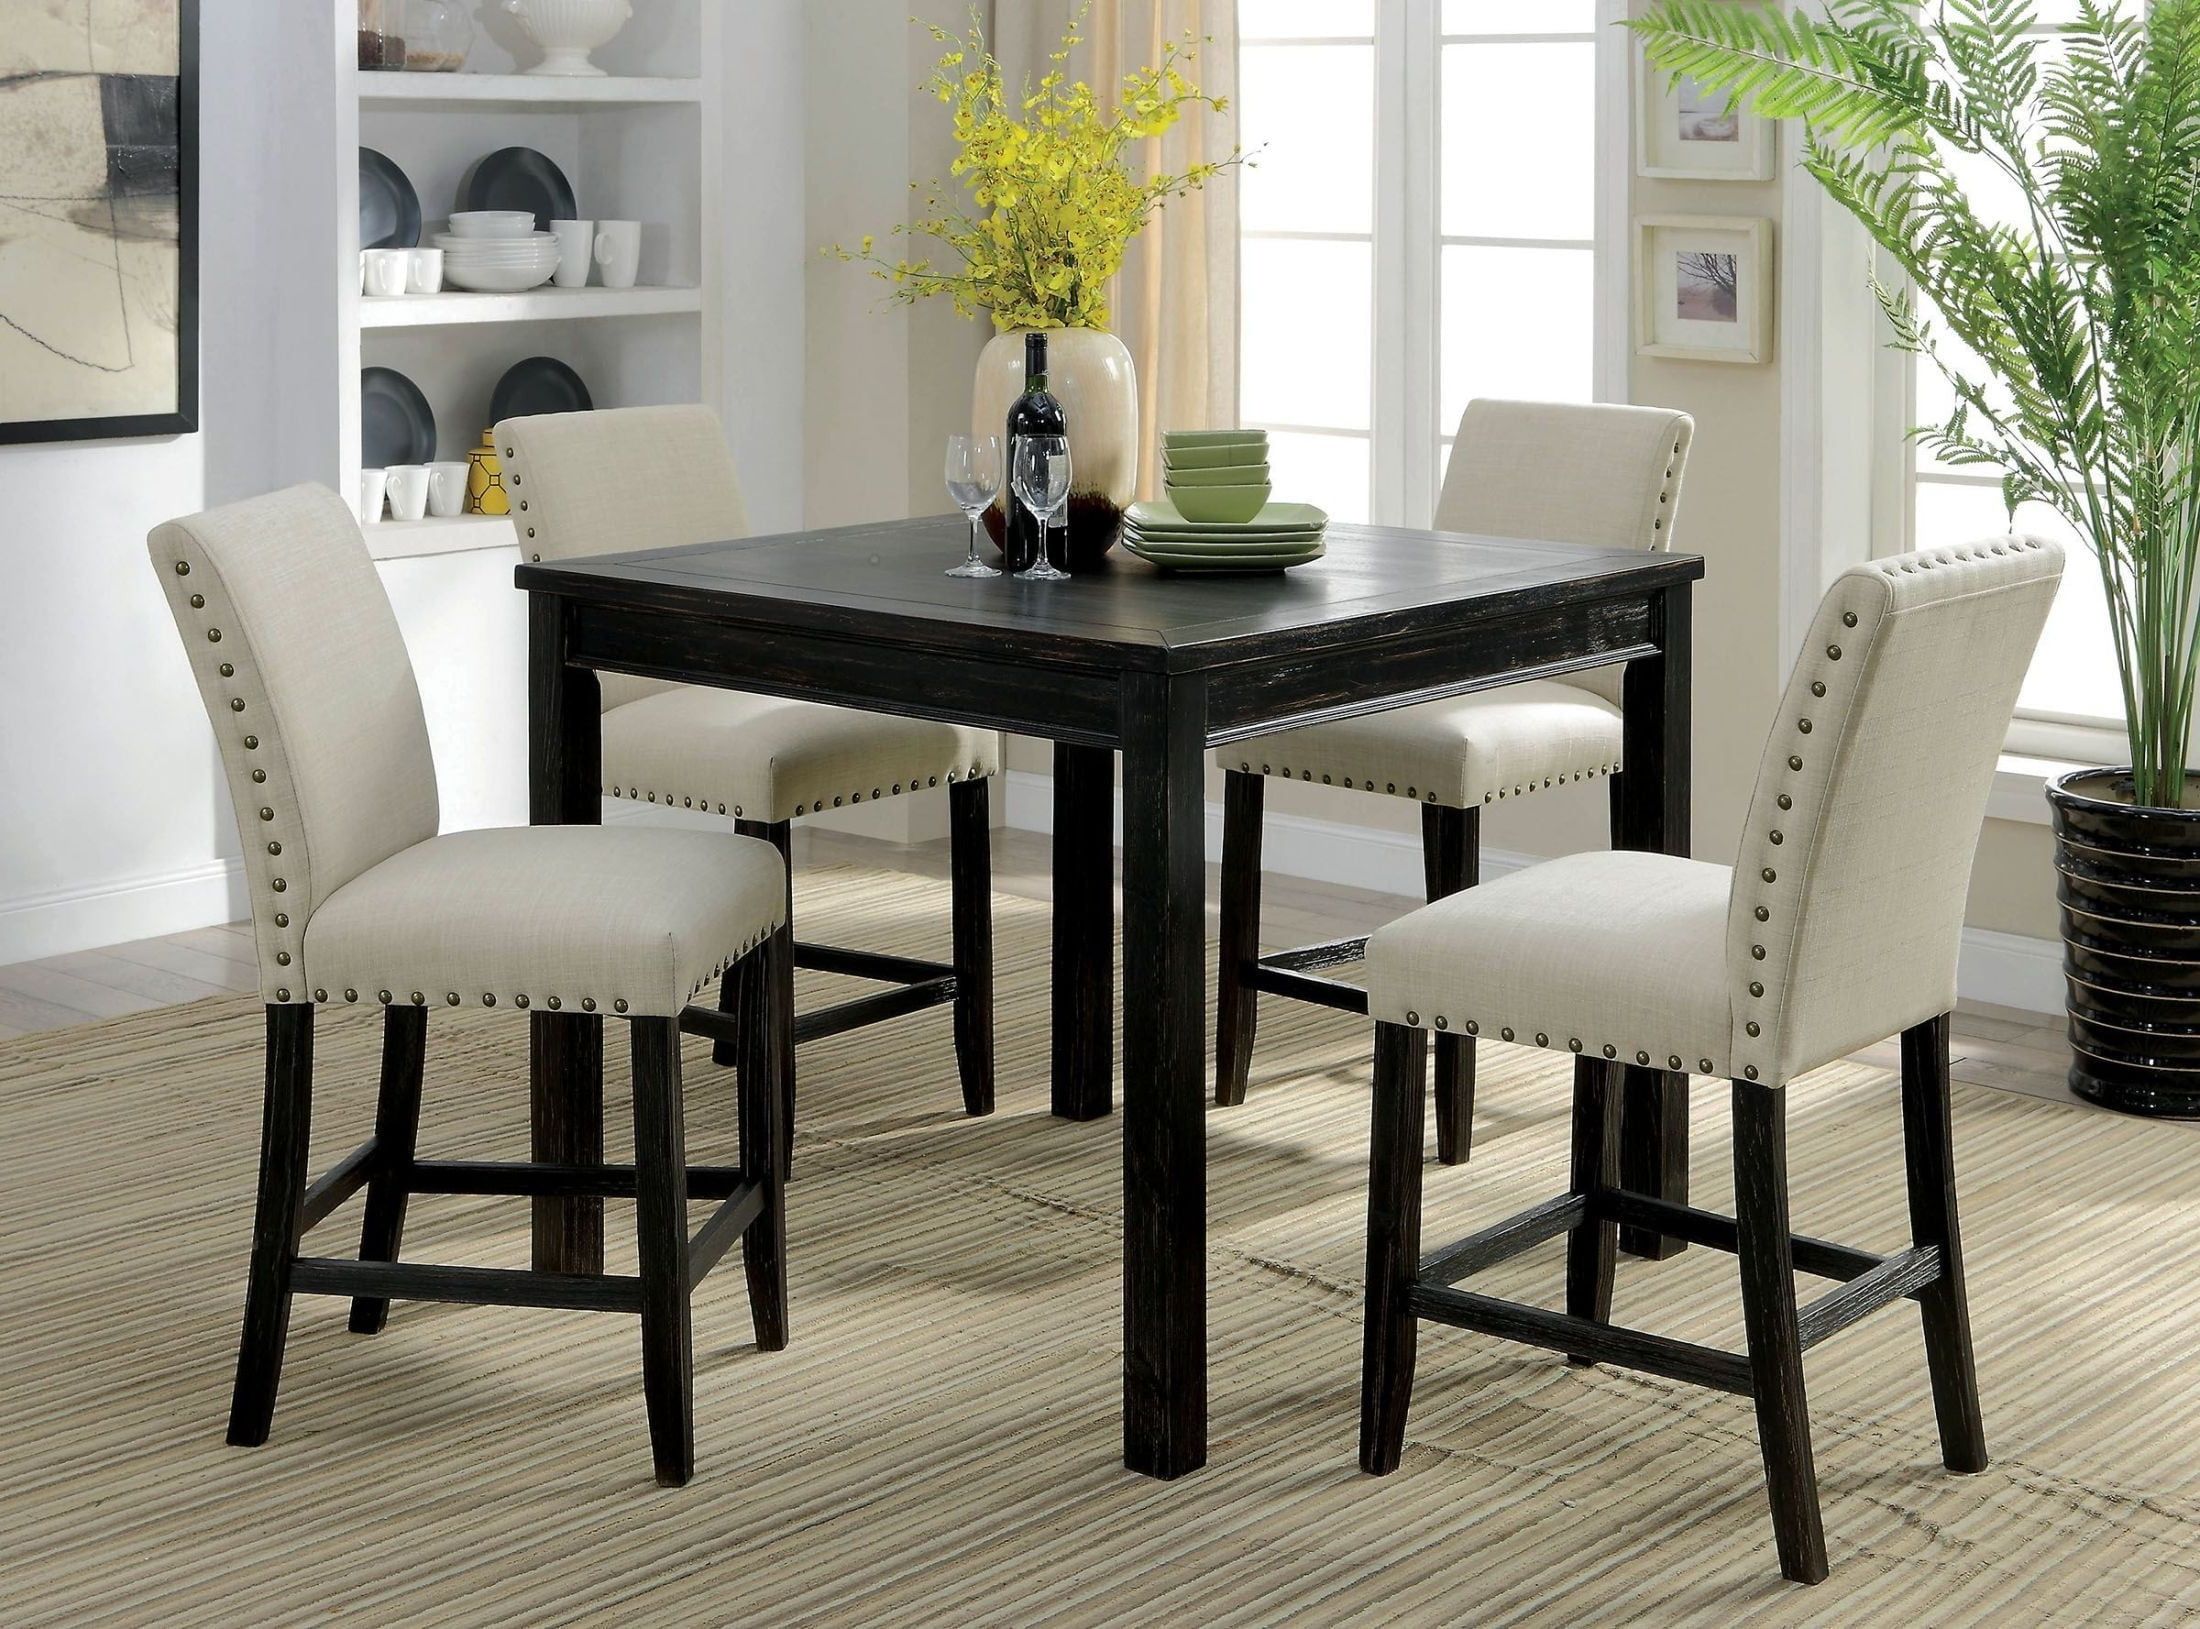 Eduarte Counter Height Dining Tables Regarding Current Kristie Antique Black Counter Height Dining Table Set From (View 8 of 20)